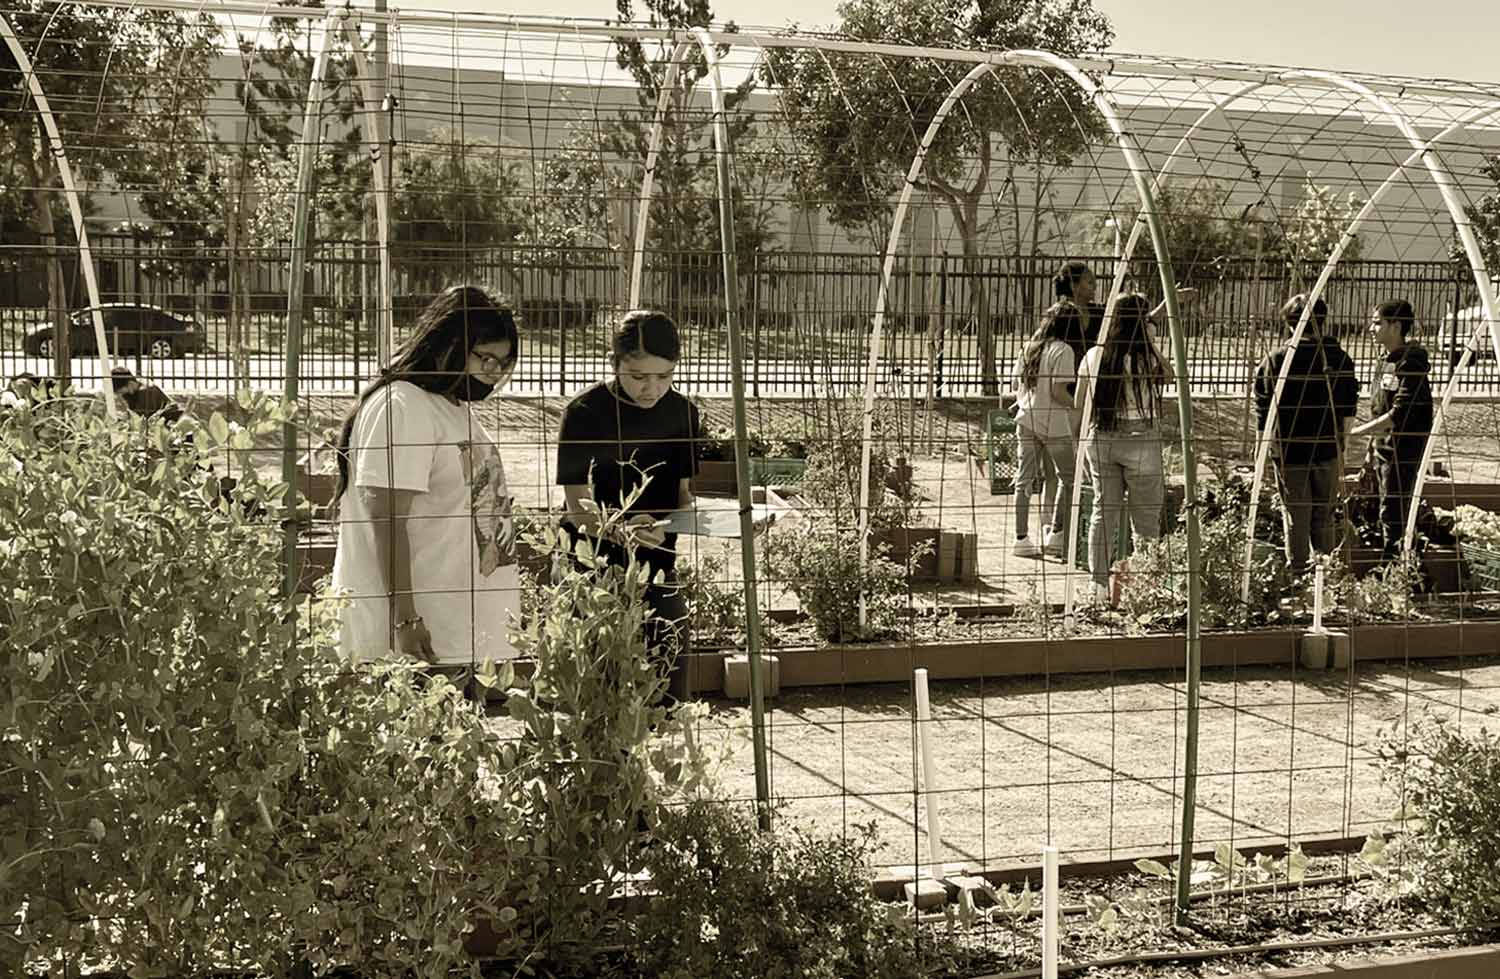 Students working outside in enclosed garden